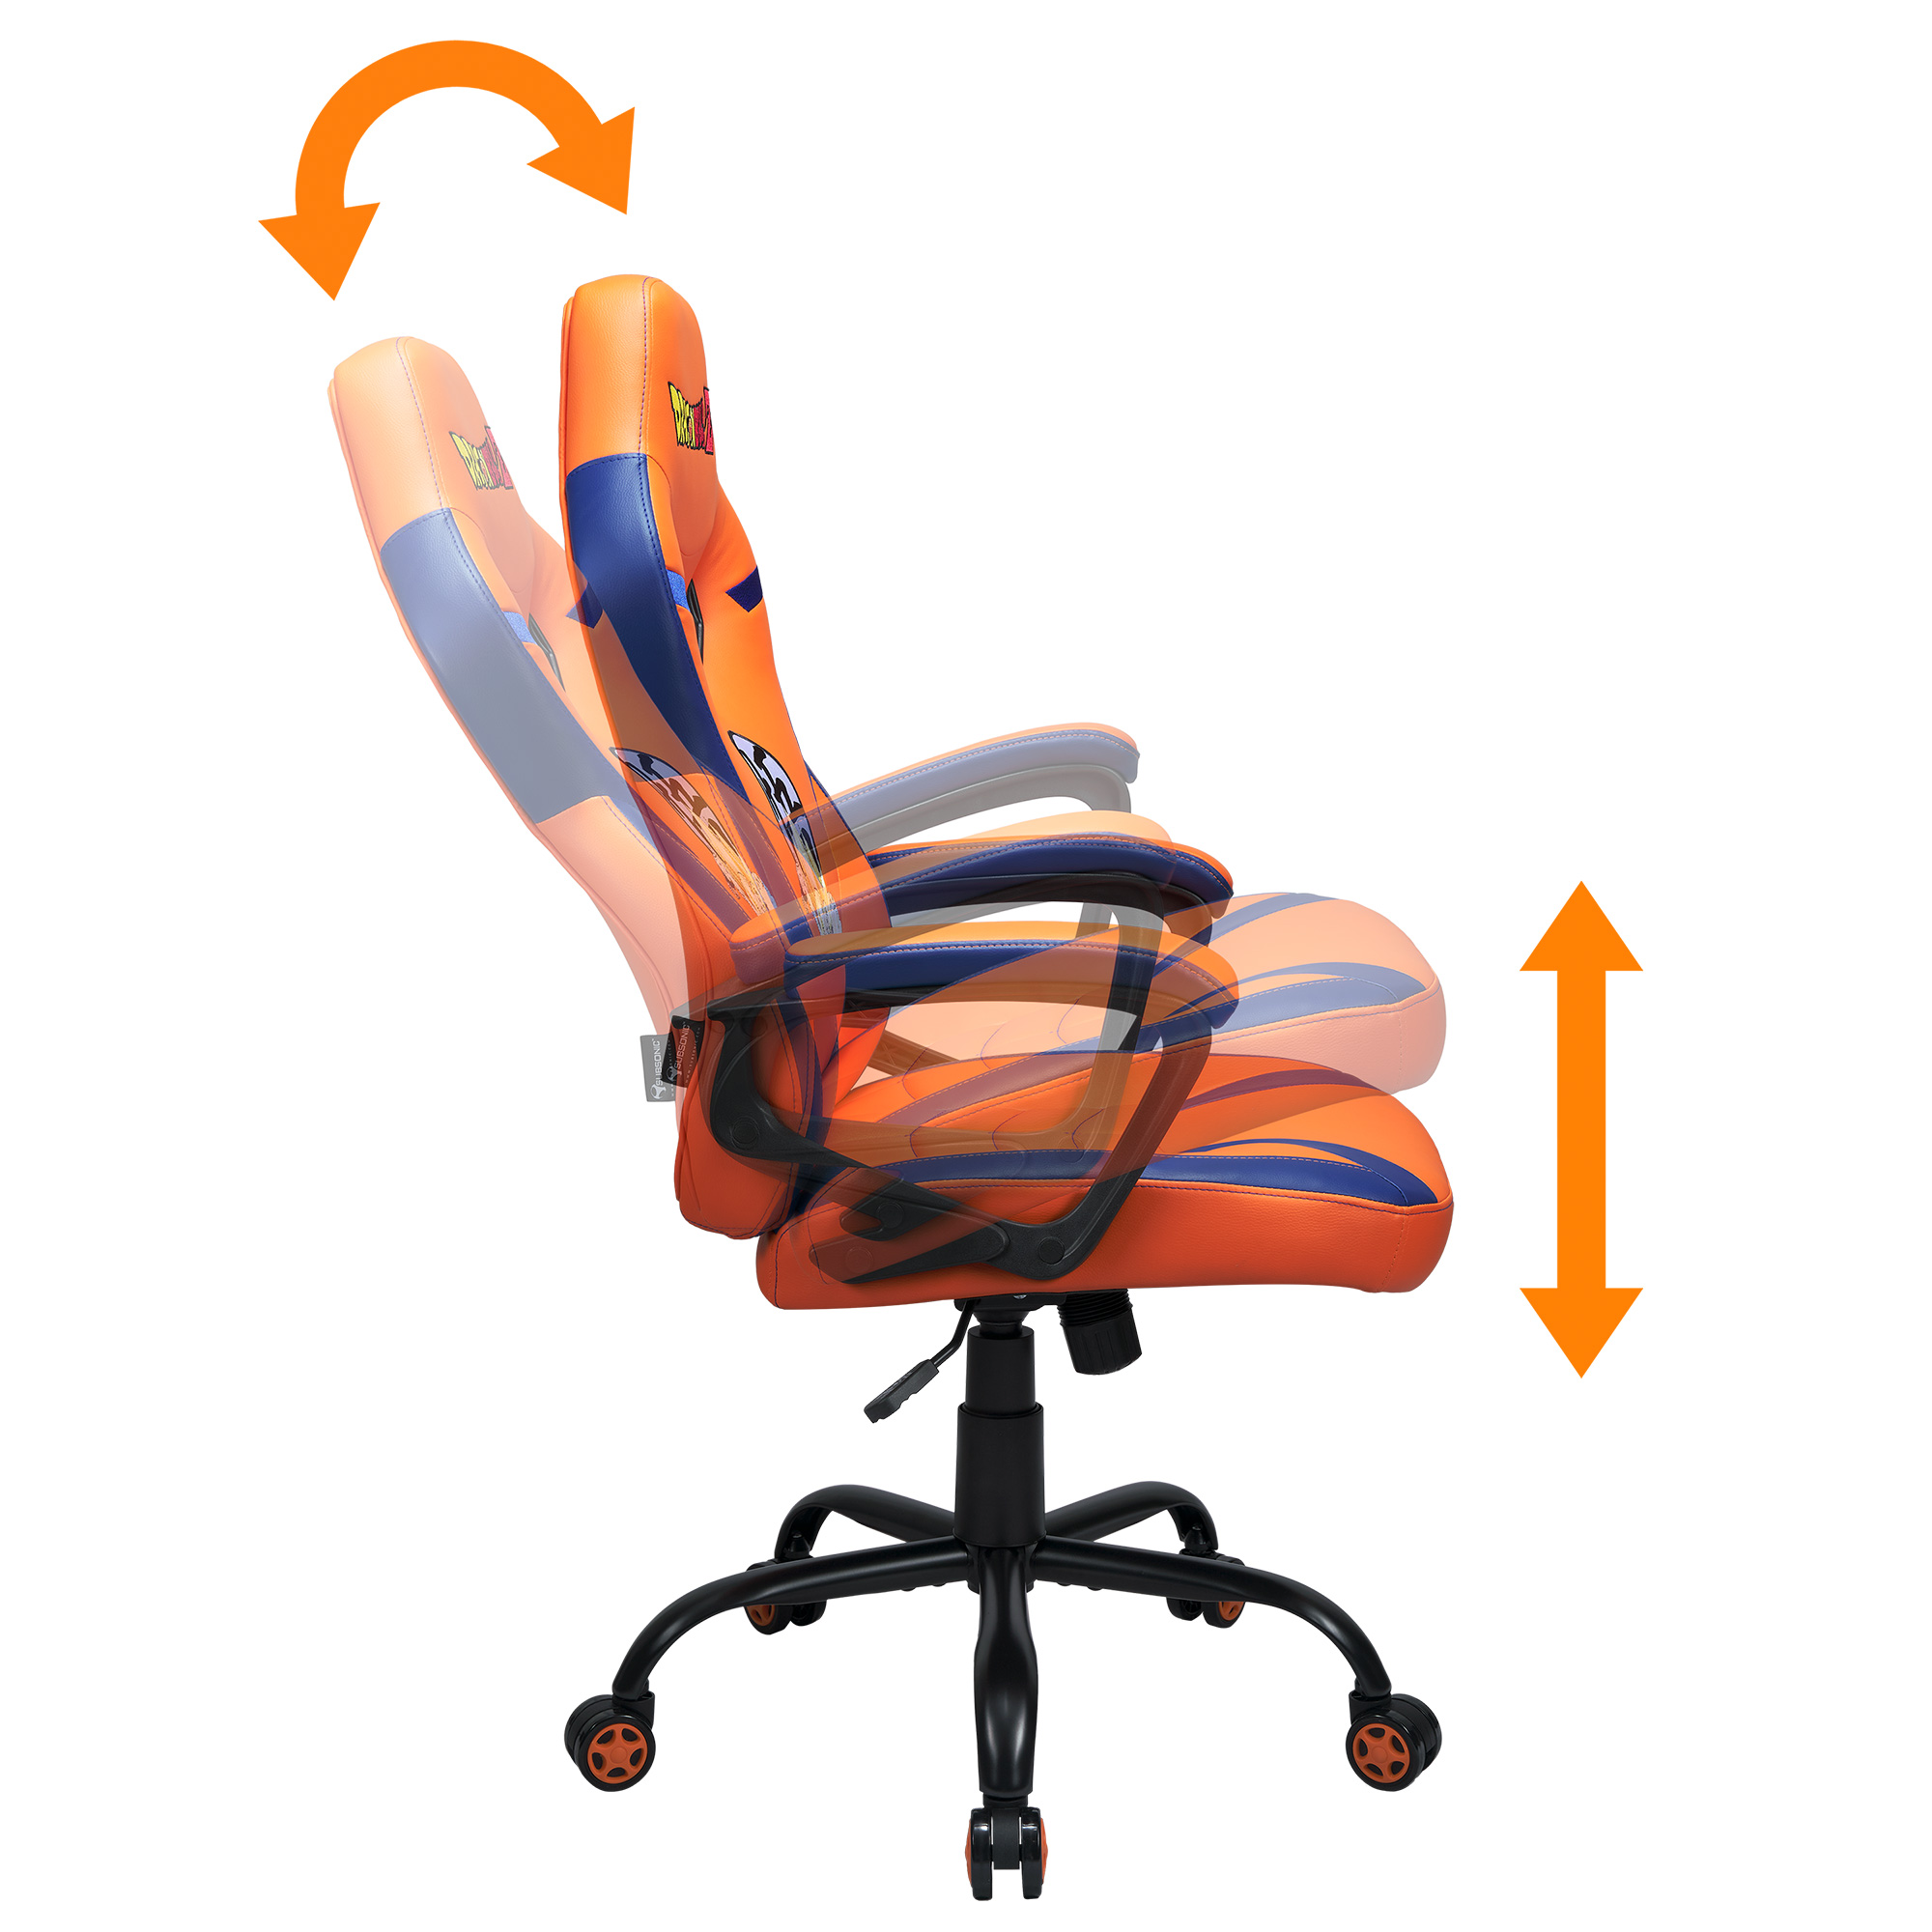 Chaise gaming sous licence officielle Dragon Ball Z | Subsonic